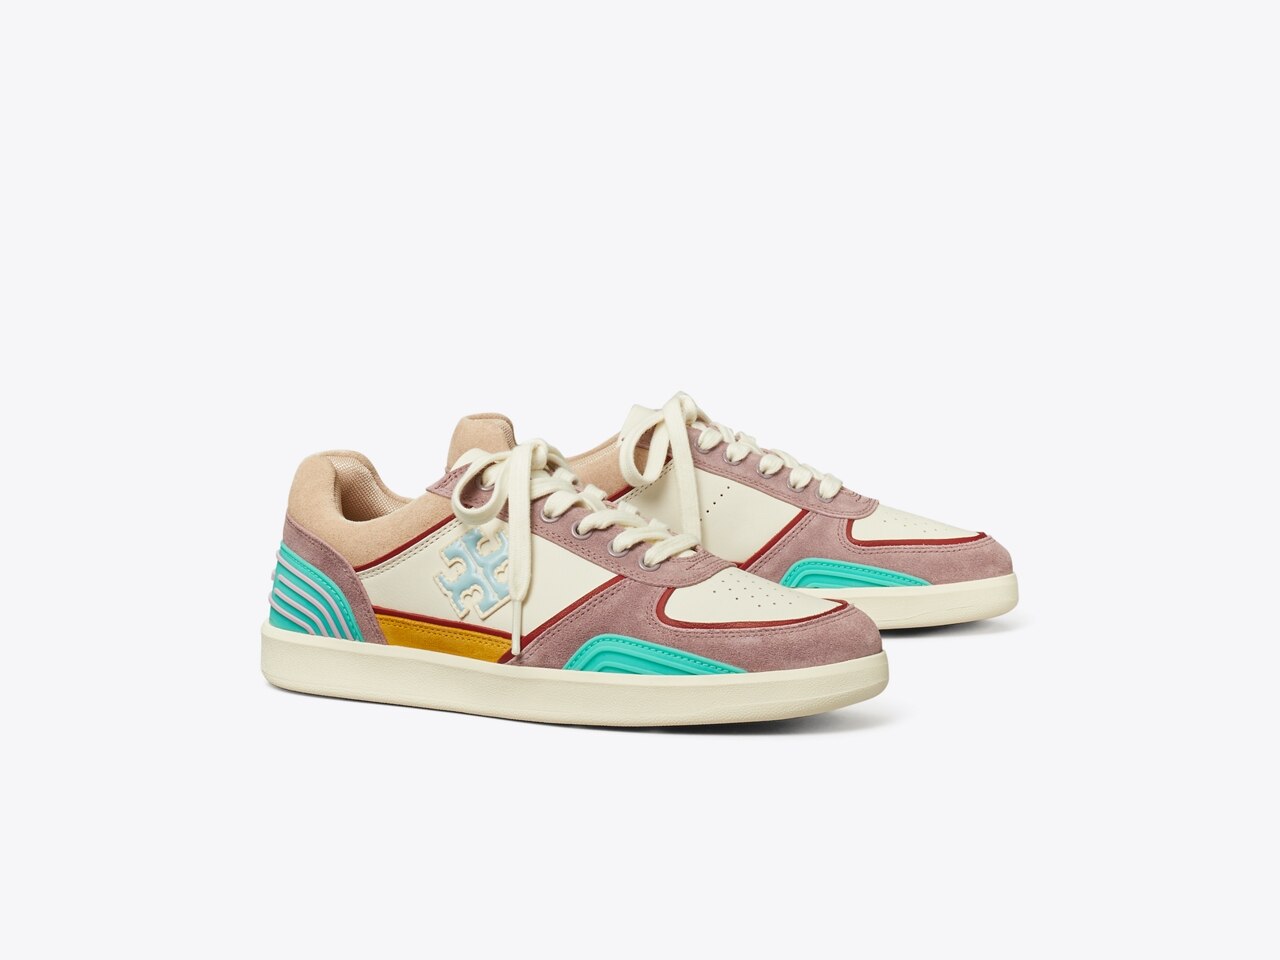 LOUIS VUITTON -Time Out Sneaker in Brown - WOMEN - Shoes